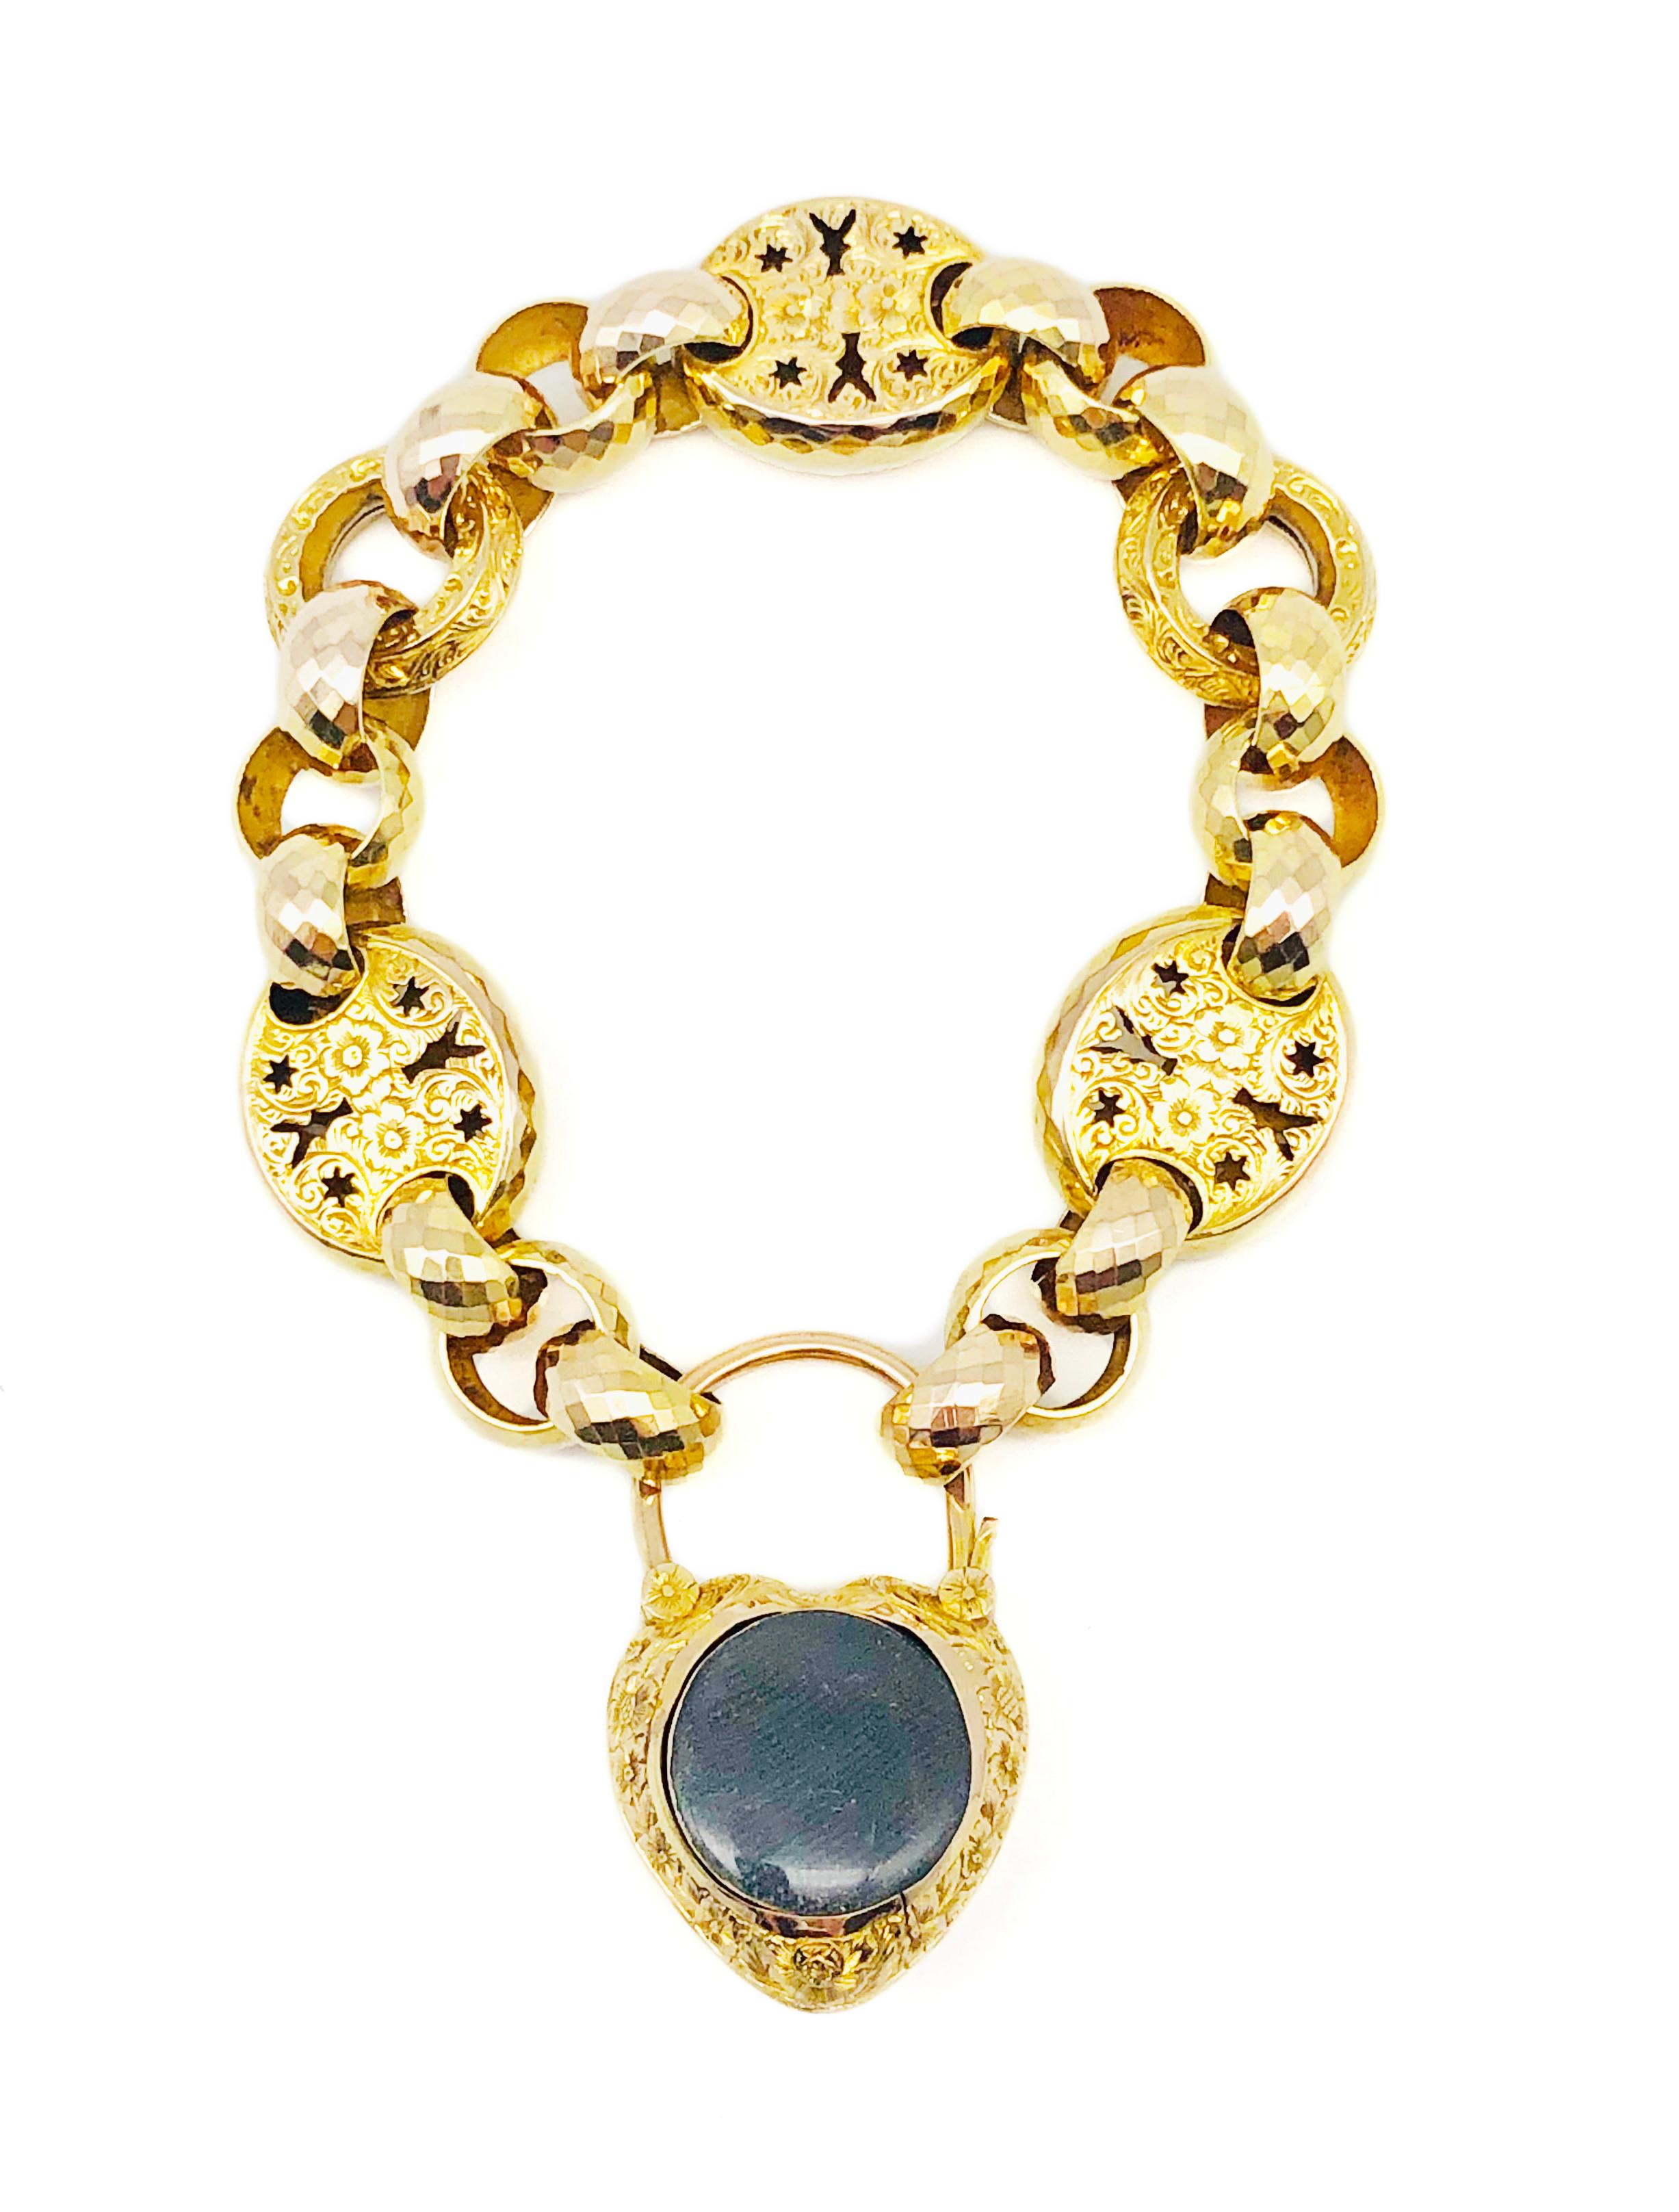 The finely engraved link bracelet with three kinds of links in two-coloured gold is held together by an engraved heart padlock with a locket back. The front of the heart is decorated with vine, vine leaves and three oval facetted aquamarines mounted